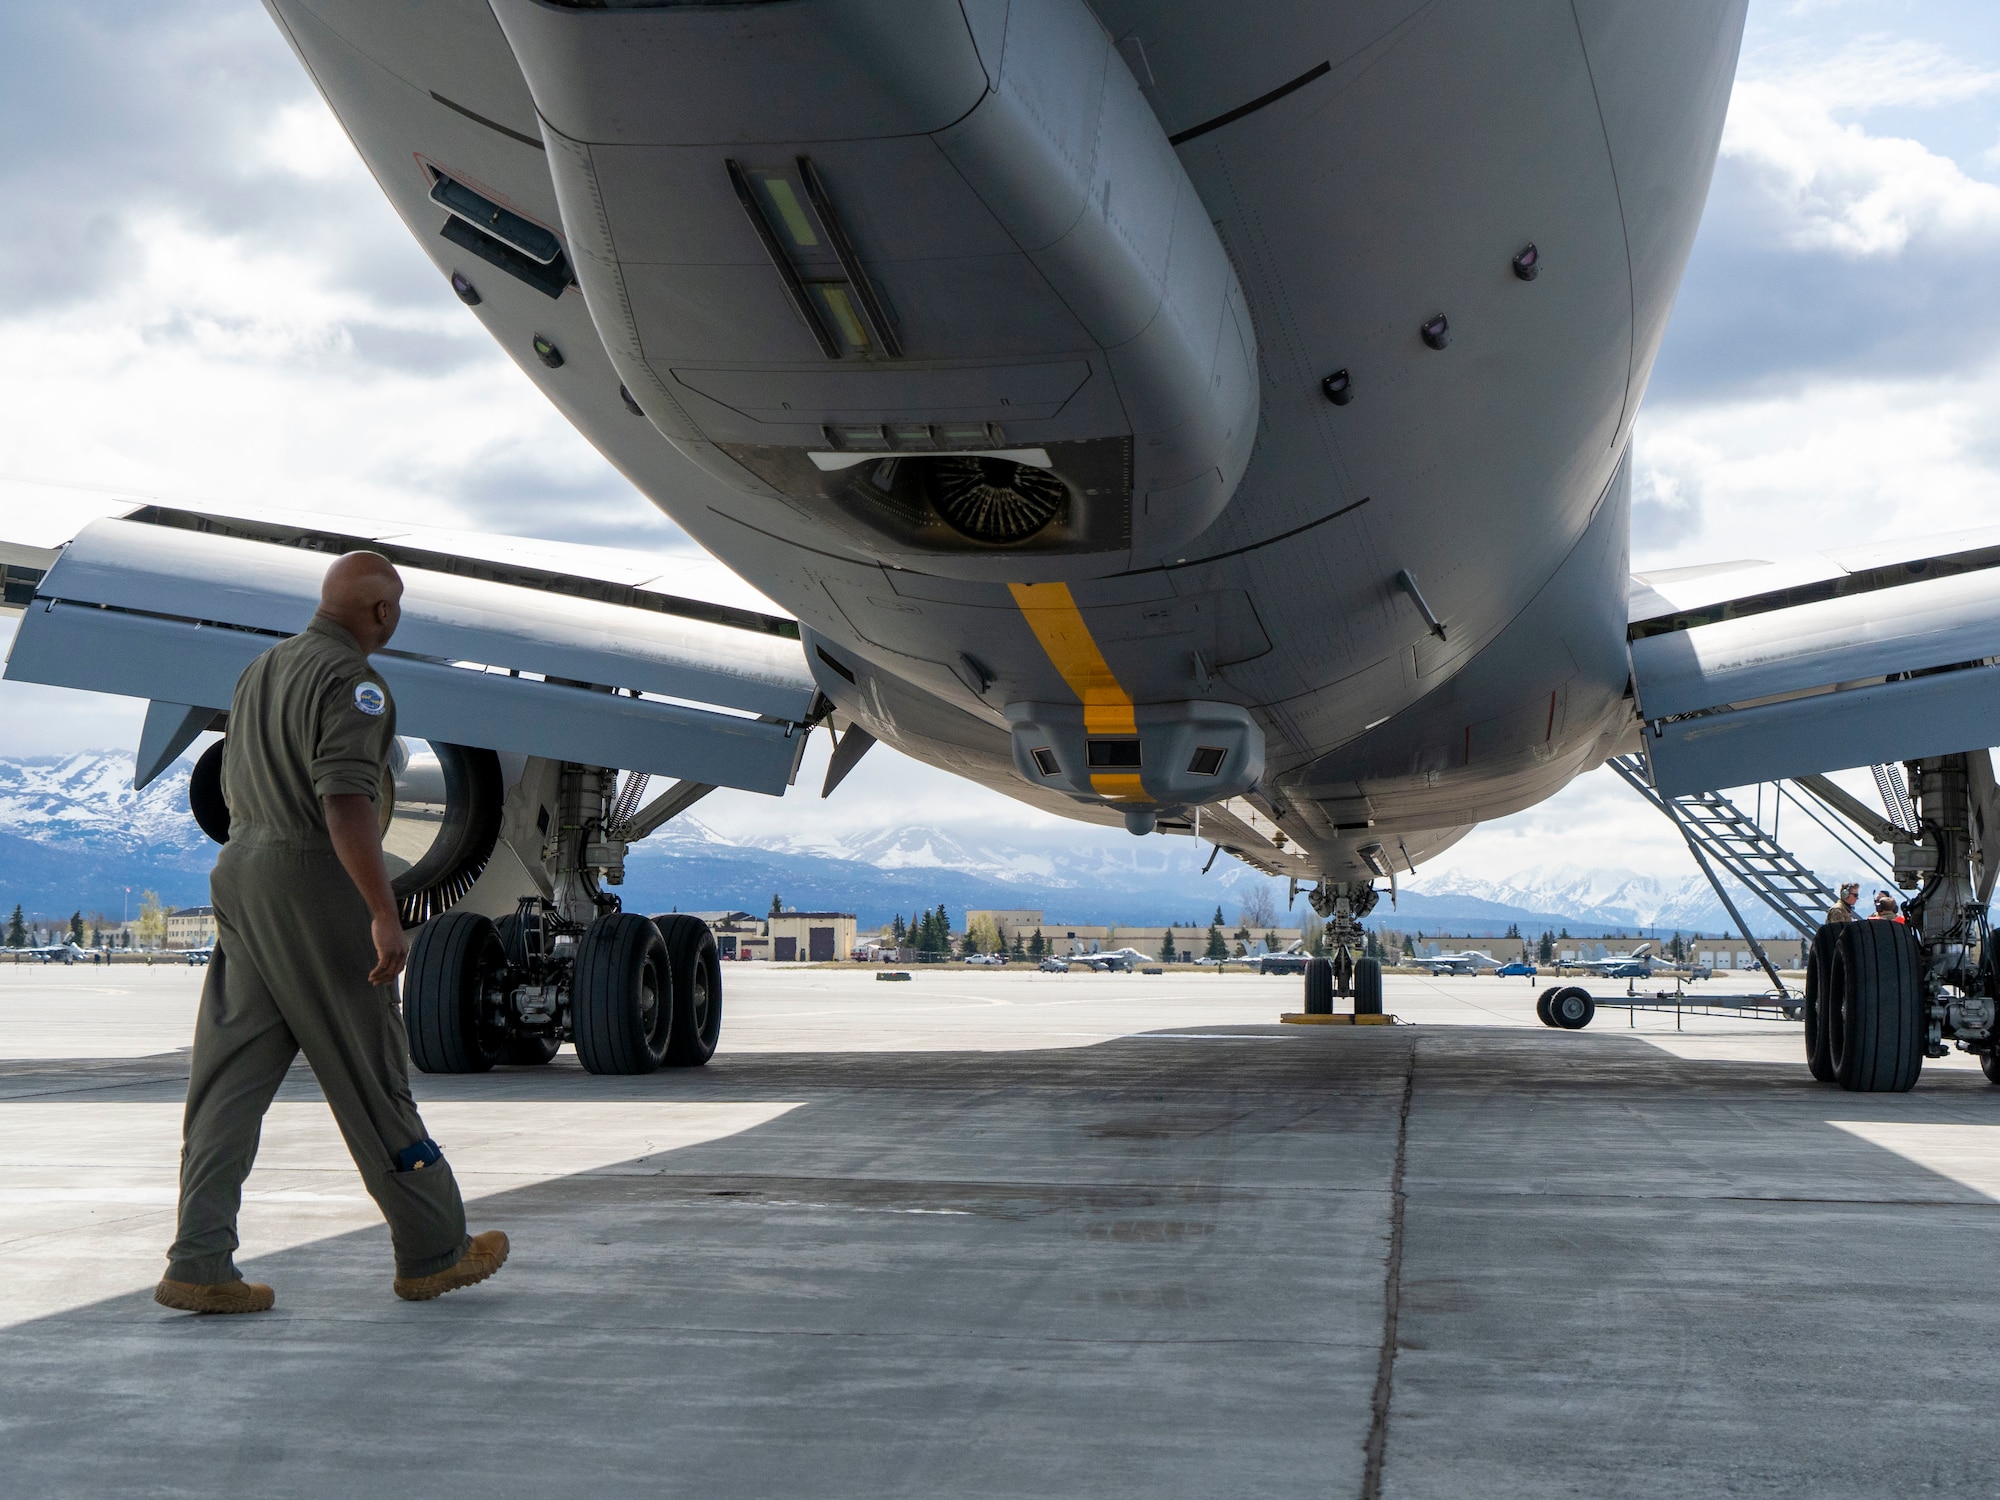 U.S. Air Force Maj. Will Watson, a pilot assigned to the 905th Air Refueling Squadron from McConnell Air Force Base, Kan., conducts a pre-flight check on a KC-46A Pegasus aircraft, assigned to the 931st Air Refueling Wing, prior to take off from Joint Base Elmendorf-Richardson, Alaska, May 11, 2021, in support of exercise Northern Edge 2021.  Approximately 15,000 U.S. service members are participating in a joint training exercise hosted by U.S. Pacific Air Forces May 3-14, 2021, on and above the Joint Pacific Alaska Range Complex, the Gulf of Alaska, and temporary maritime activities area. NE21 is one in a series of U.S. Indo-Pacific Command exercises designed to sharpen the joint forces’ skills; to practice tactics, techniques, and procedures; to improve command, control and communication relationships; and to develop cooperative plans and programs. (U.S. Air Force photo by Senior Airman Adriana Barrientos)